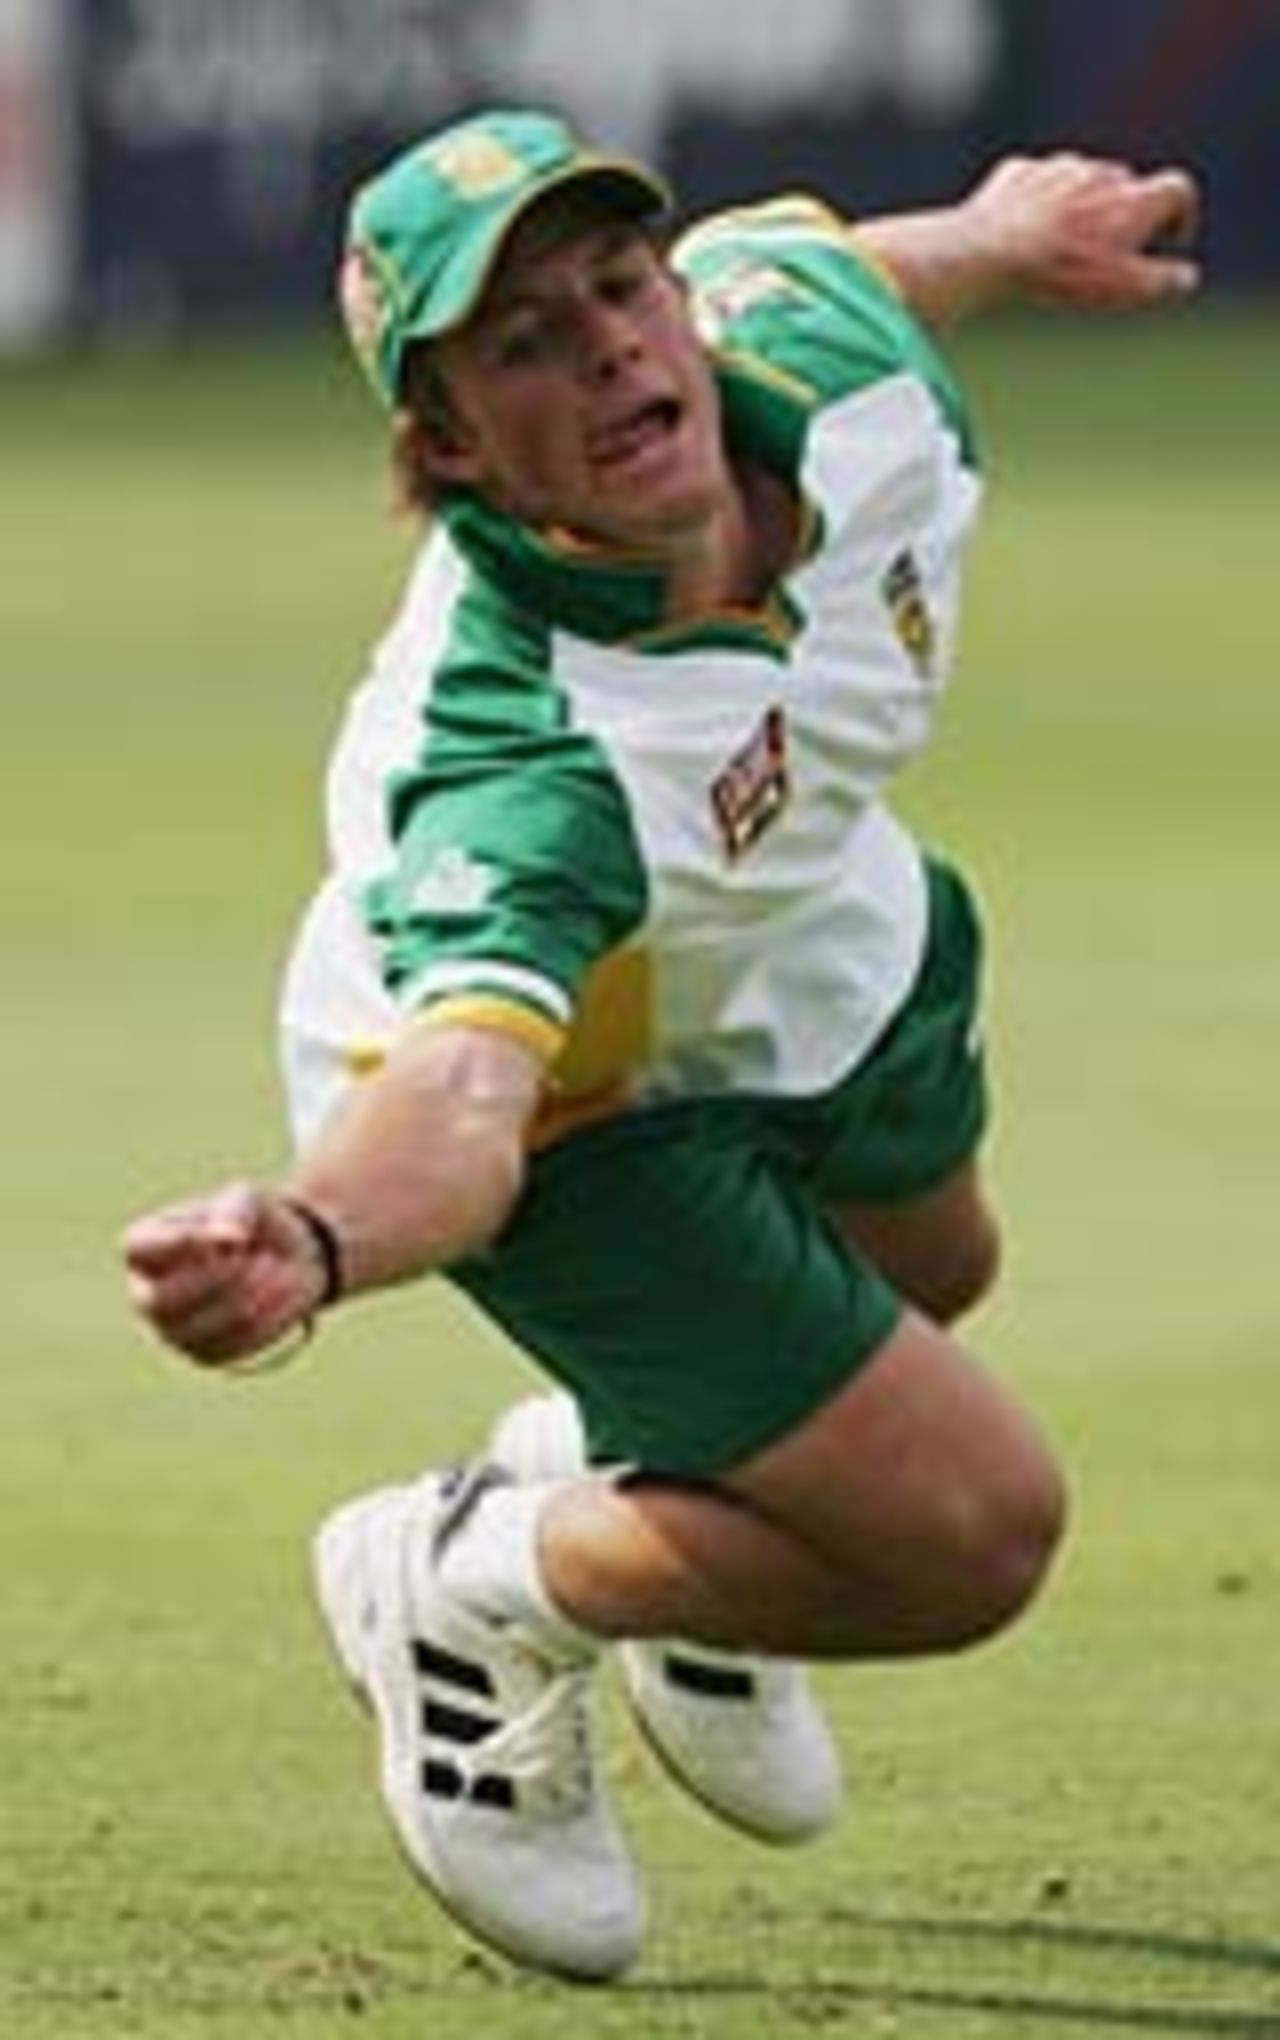 AB de Villiers diving at a practice session at the Wanderers, Johannesburg, January 11, 2005